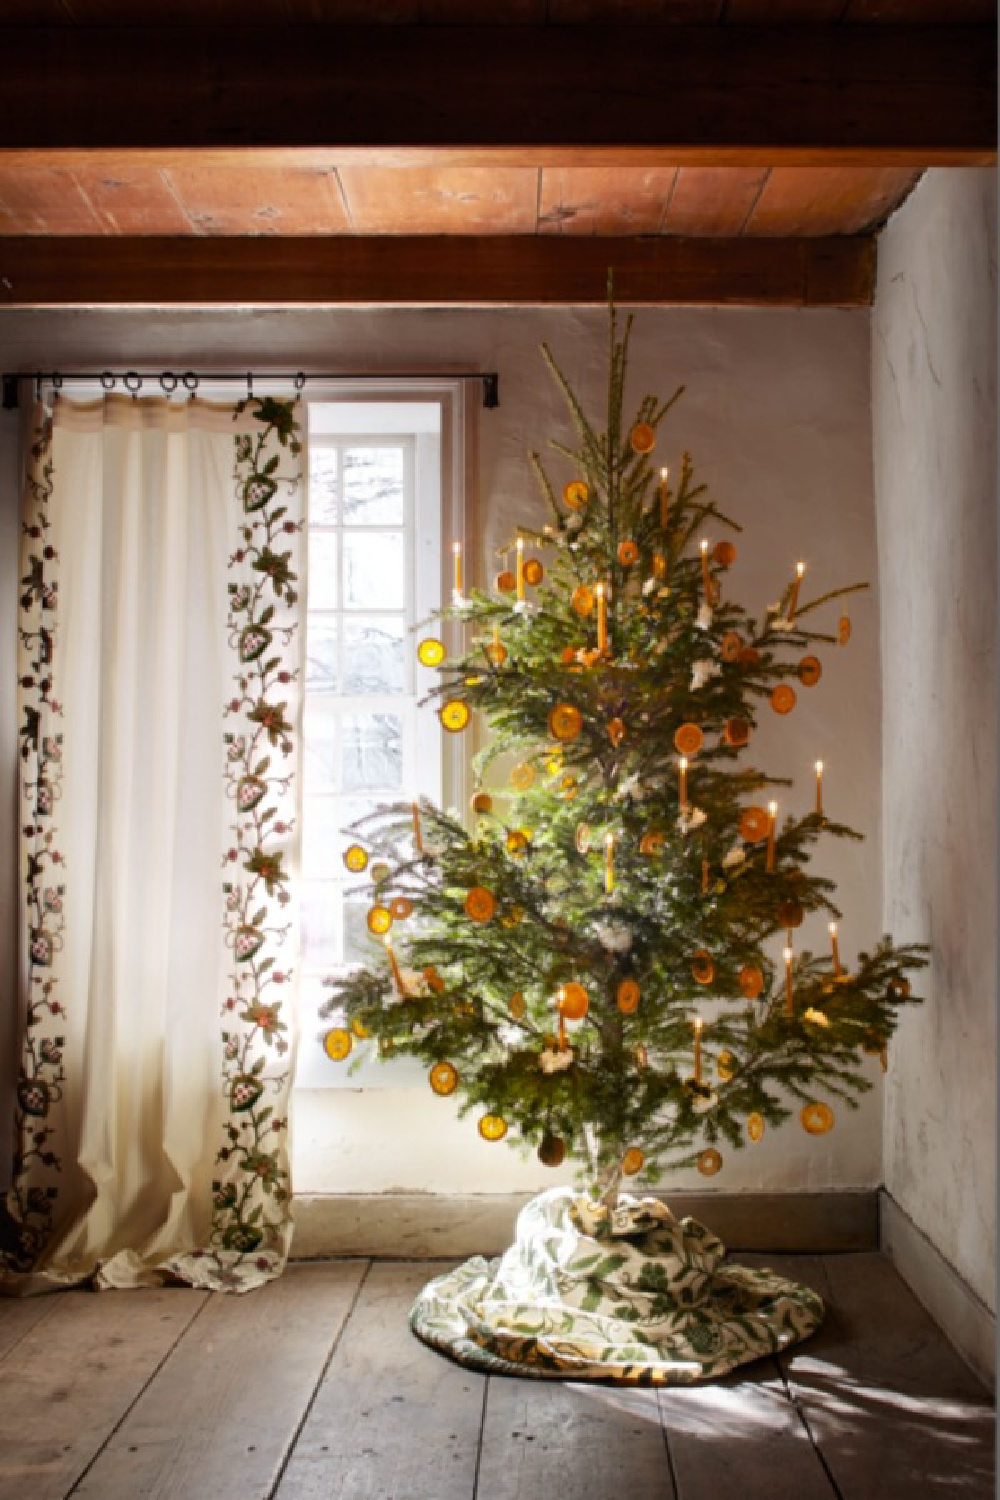 Beautiful Scandi Christmas tree with citrus dried orange slices and lit candles - designed by Michael Putnam in Veranda, photo by Sang An. #citruschristmas #scandichristmas #citrusgarland